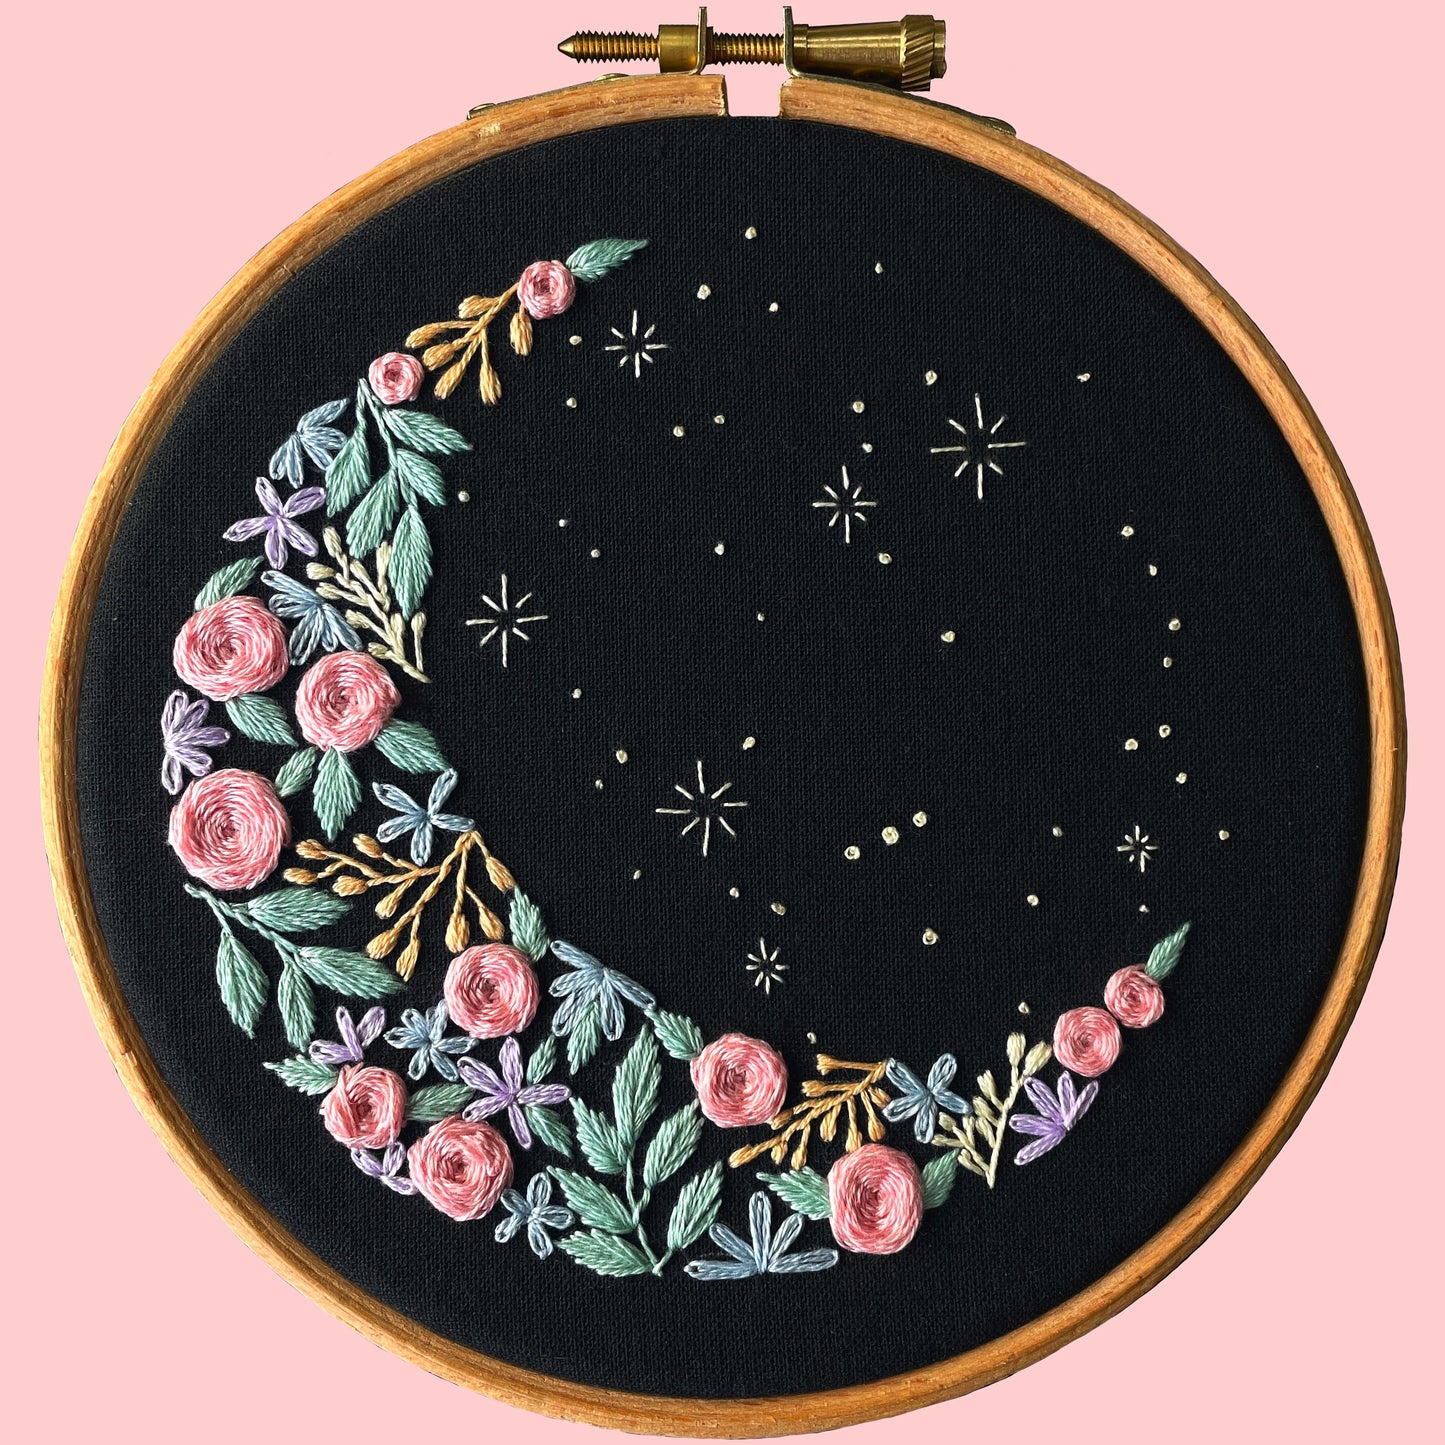 Floral Moon Embroidery Kit